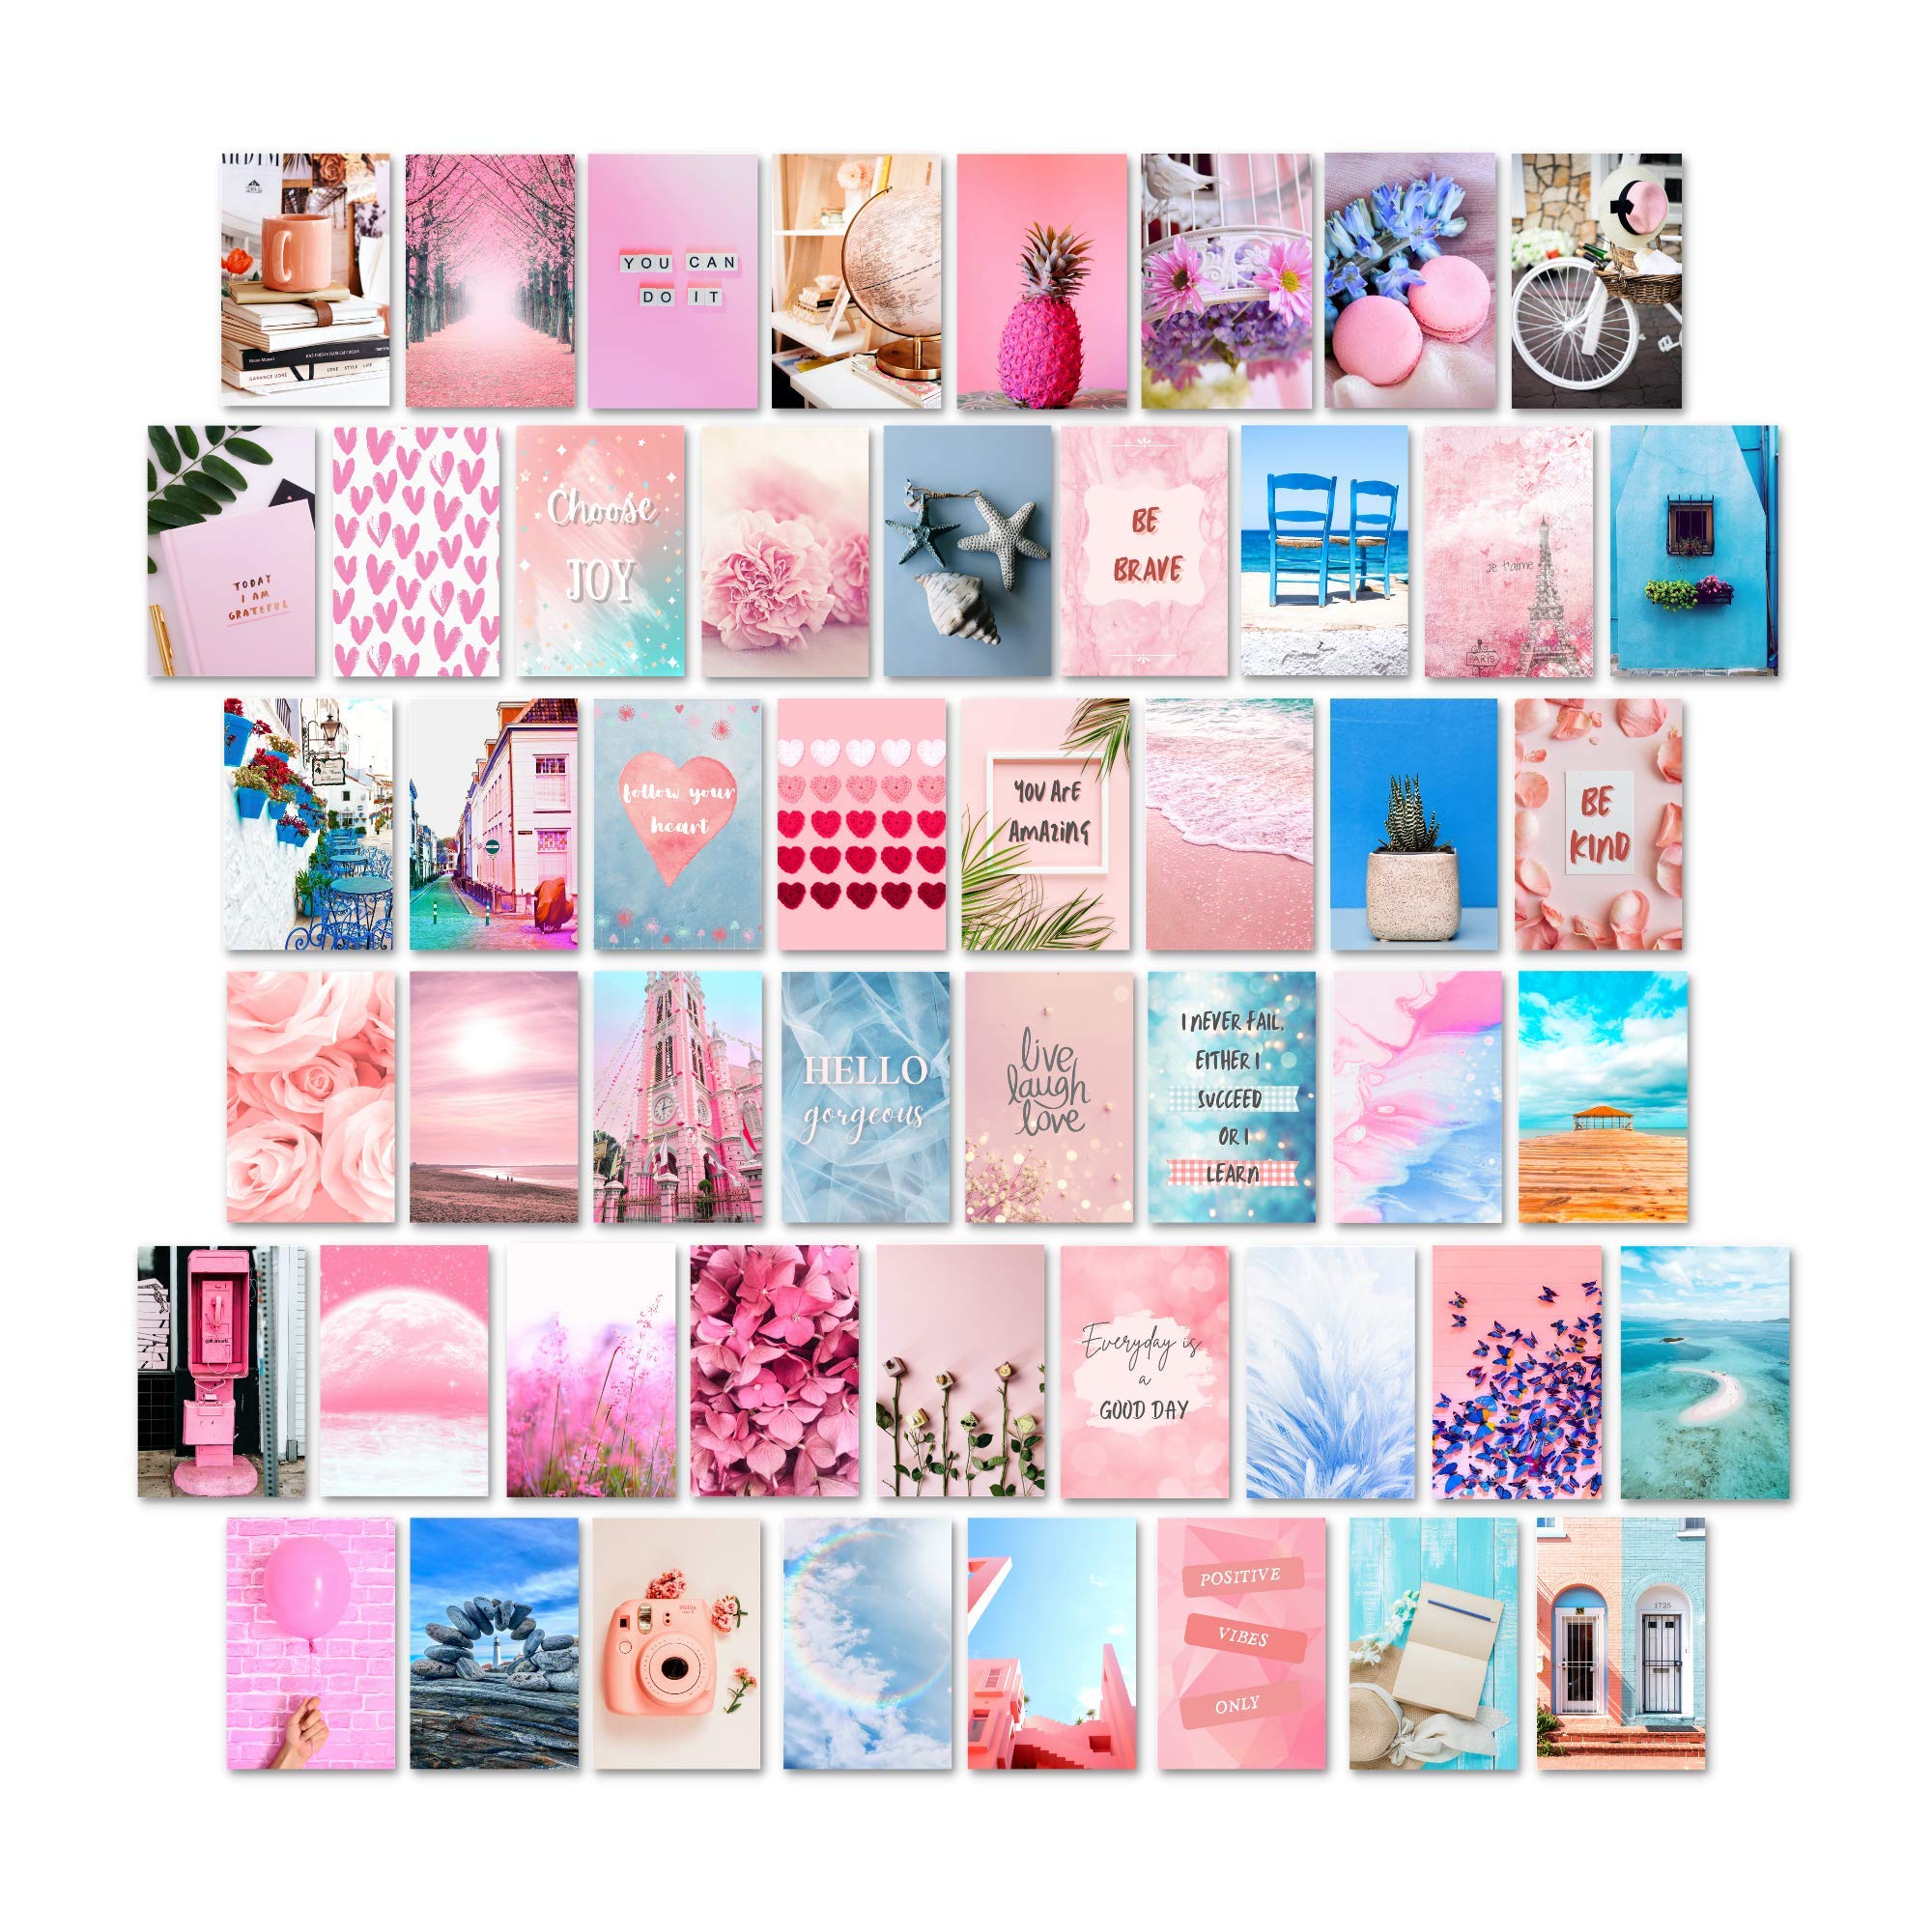  TikTok Hintergrundbild 2000x2000. Koozto Wall Collage Kit, 50pcs 4x6 inches Pink and Blue Photo Prints, Cute Aesthetic Picture for Dorm College Wall Art Decorations, Trendy TikTok Room Decor Wallpaper for Teen Girl Bedroom, Pink, Blue